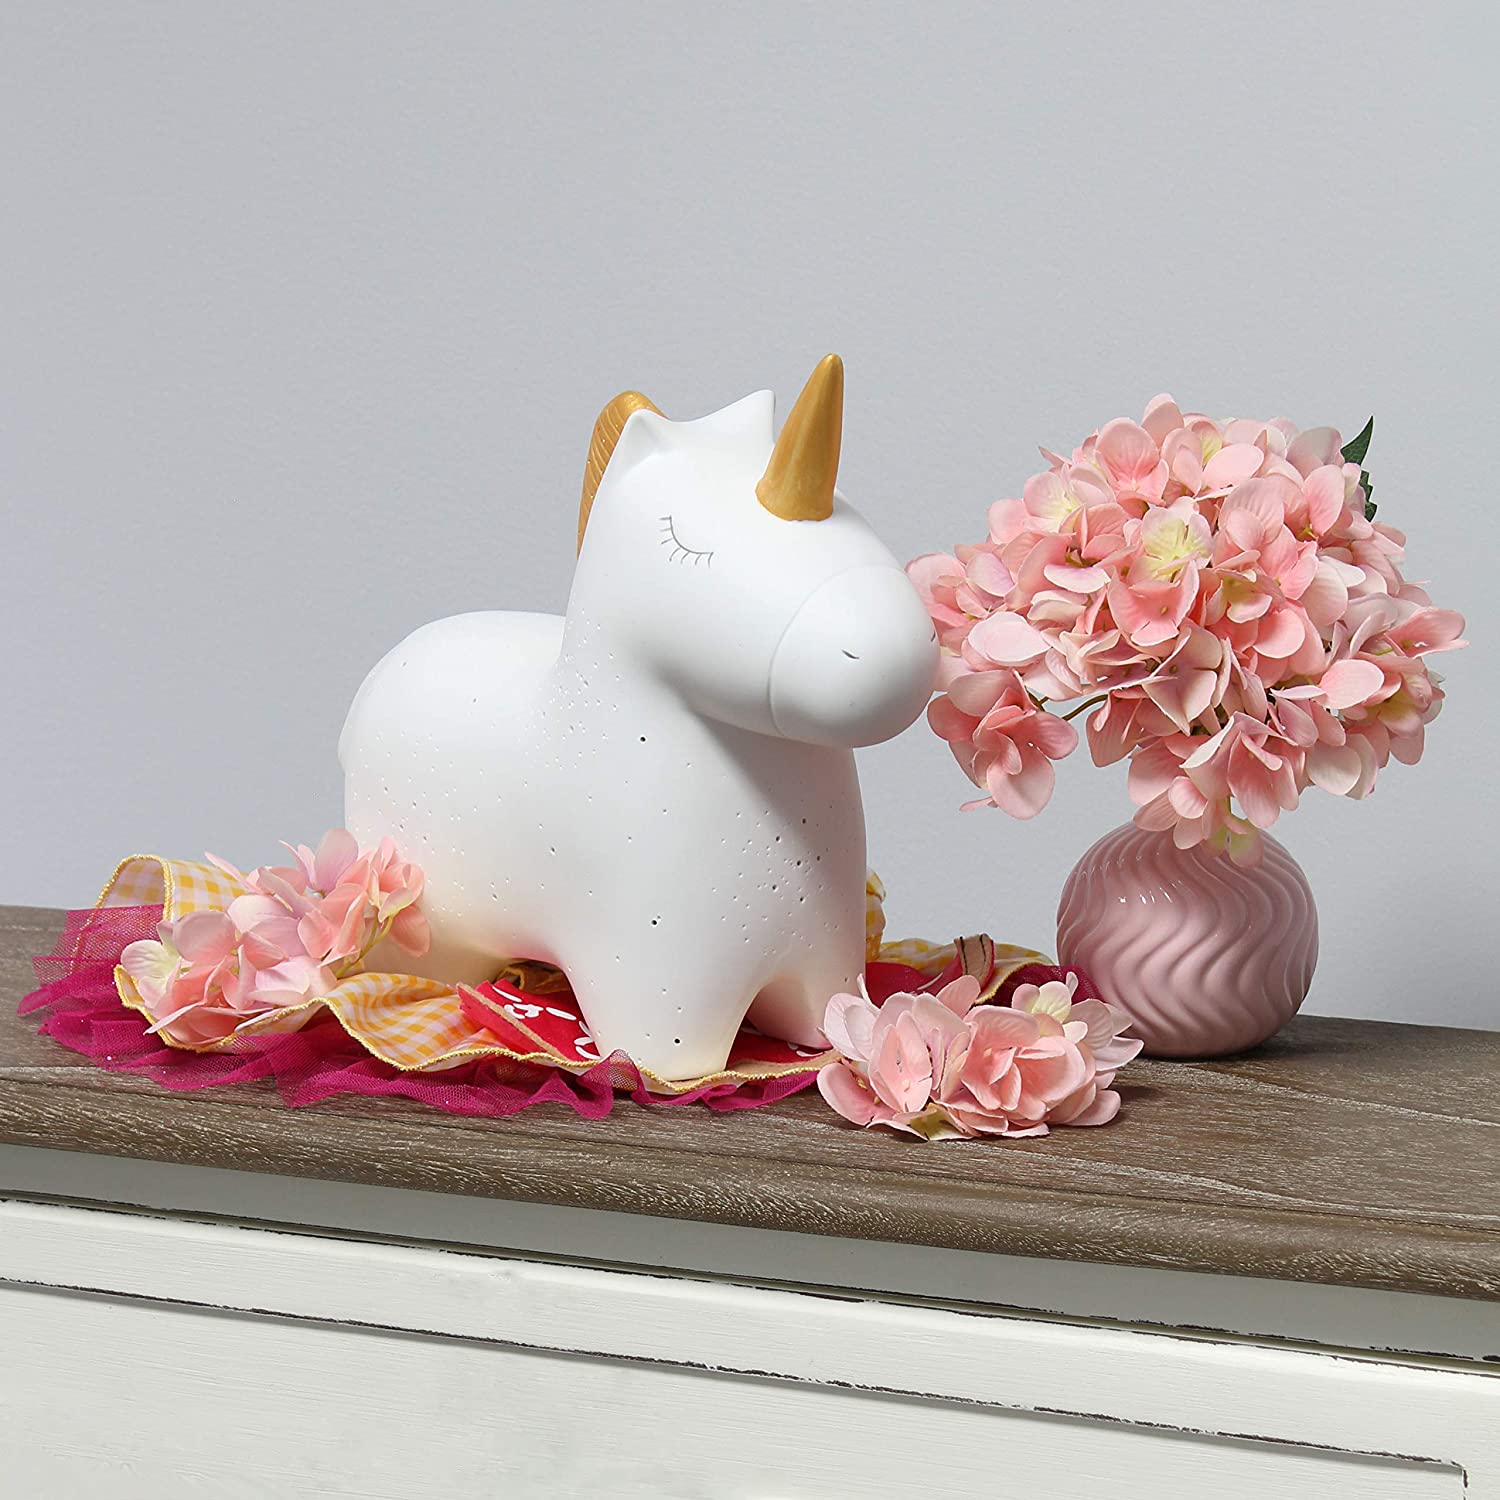 Simple Designs Gold and White Porcelain Fun Shaped Night Light Table Lamp, Unicorn